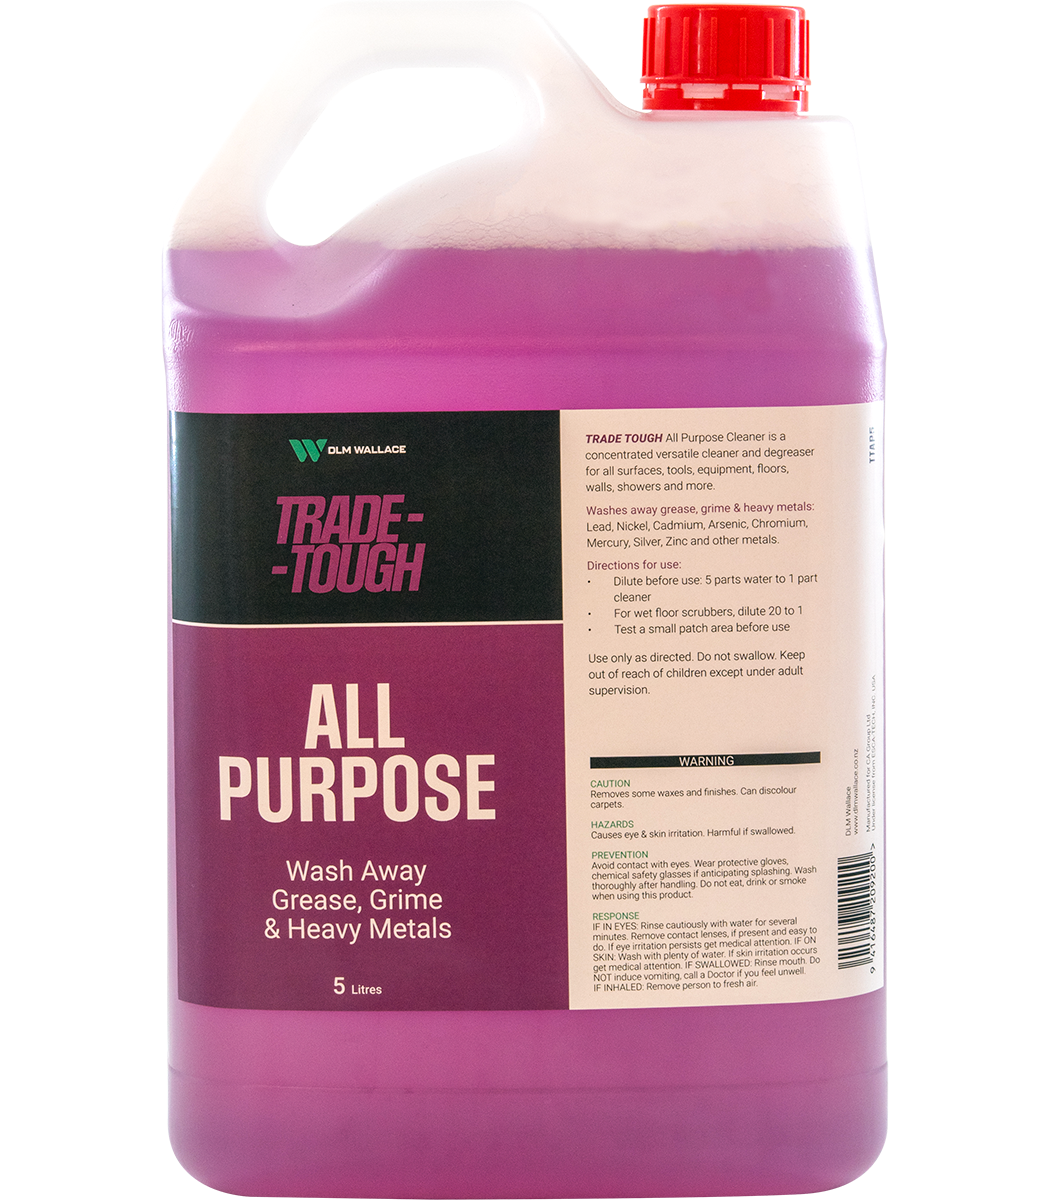 Wesbite Name: Trade-Tough All Purpose cleaner